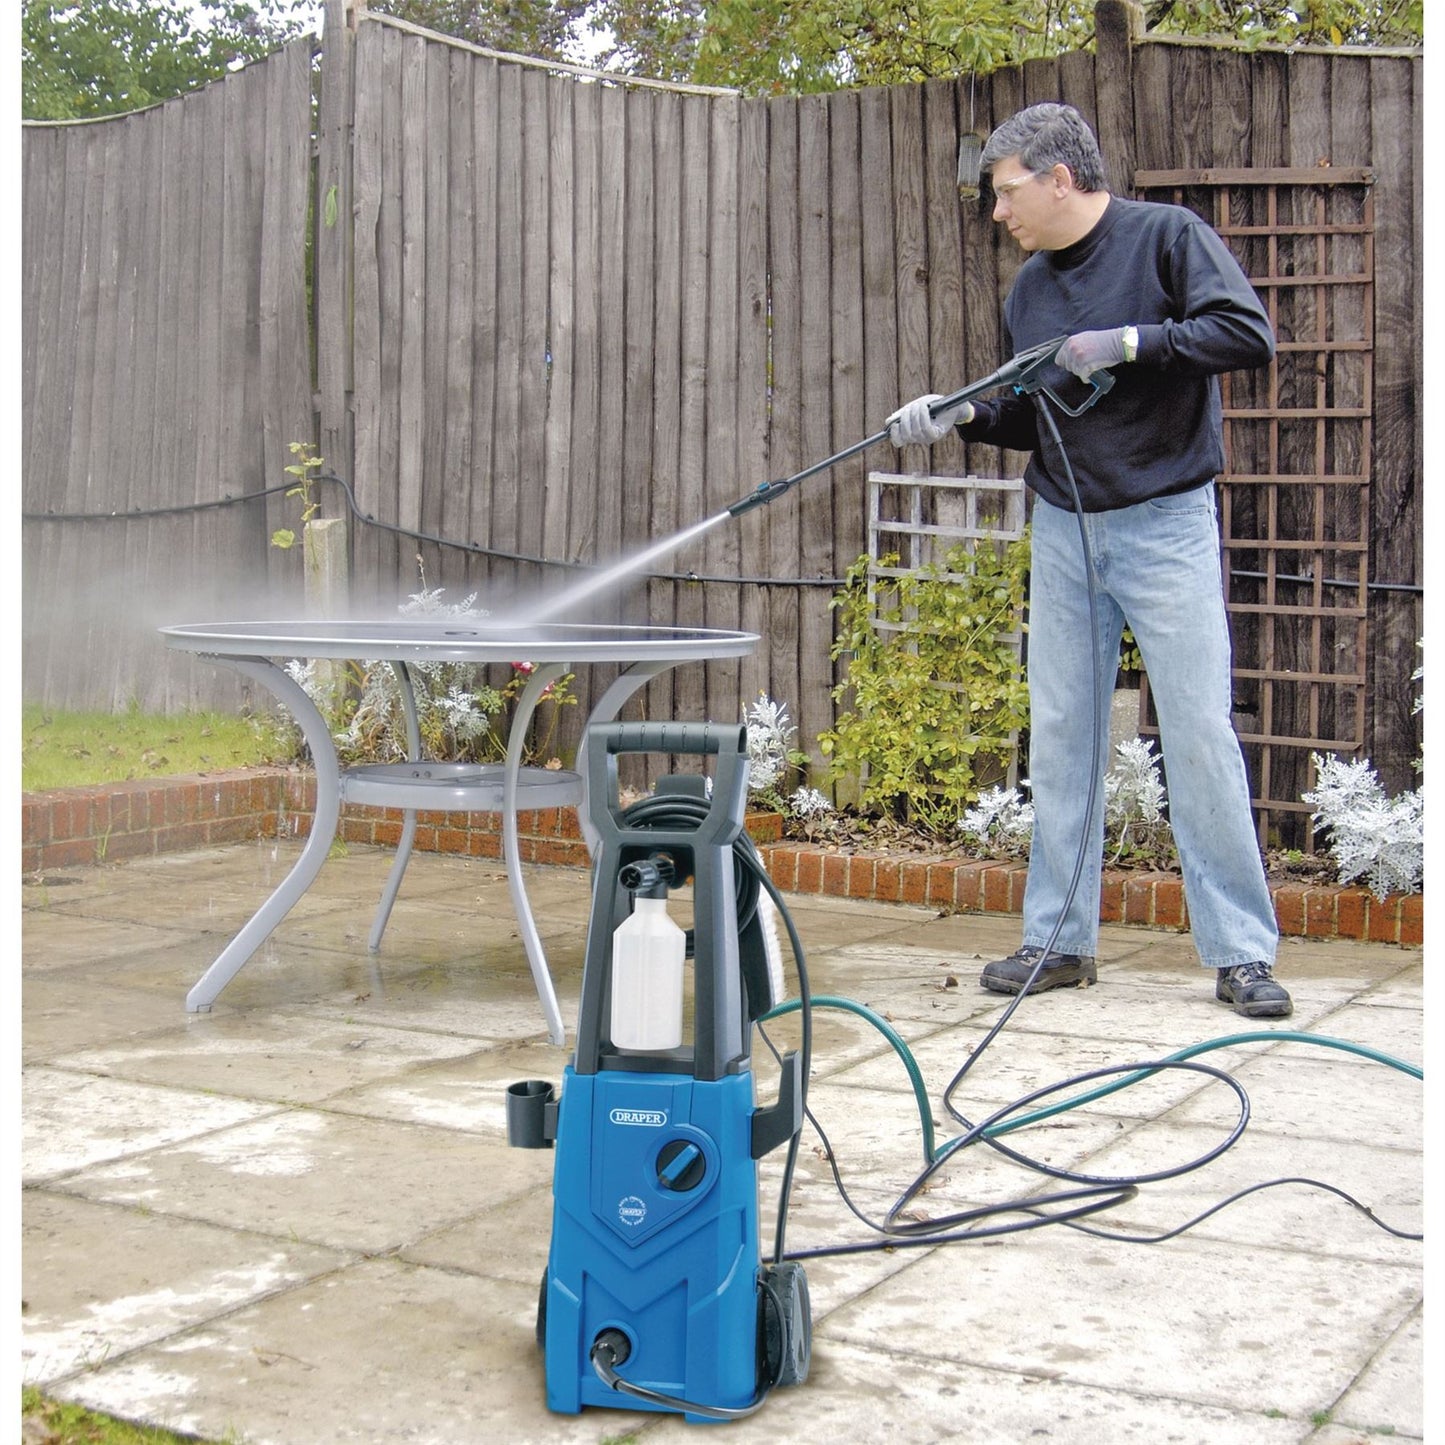 Draper 98676 230V Pressure Washer (135bar) Lightweight With 5 Metre Cable